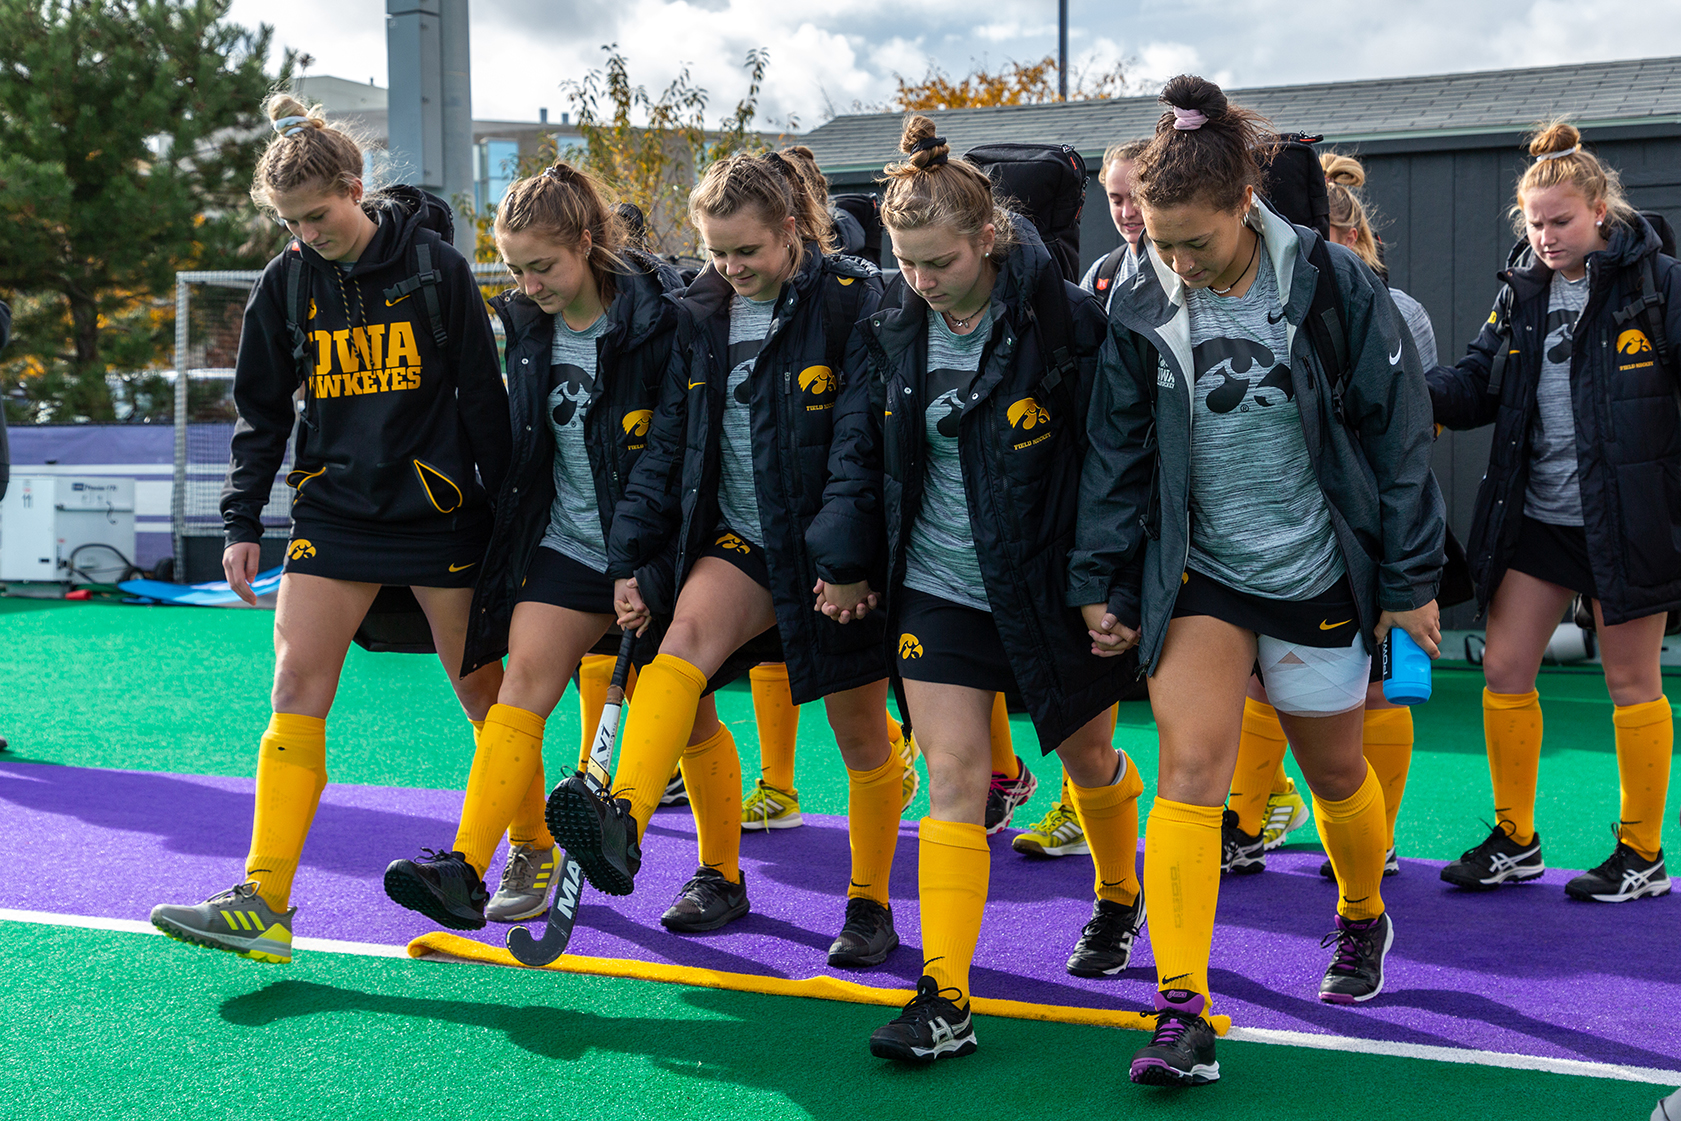  The Iowa Field Hockey Team steps over a golden stripe before the Semifinals in the Big Ten Field Hockey Tournament at Lakeside Field in Evanston, IL on Friday, Nov. 2, 2018. The no. 8 ranked Hawkeyes defeated the no. 7 ranked Wolverines 2-1. The str